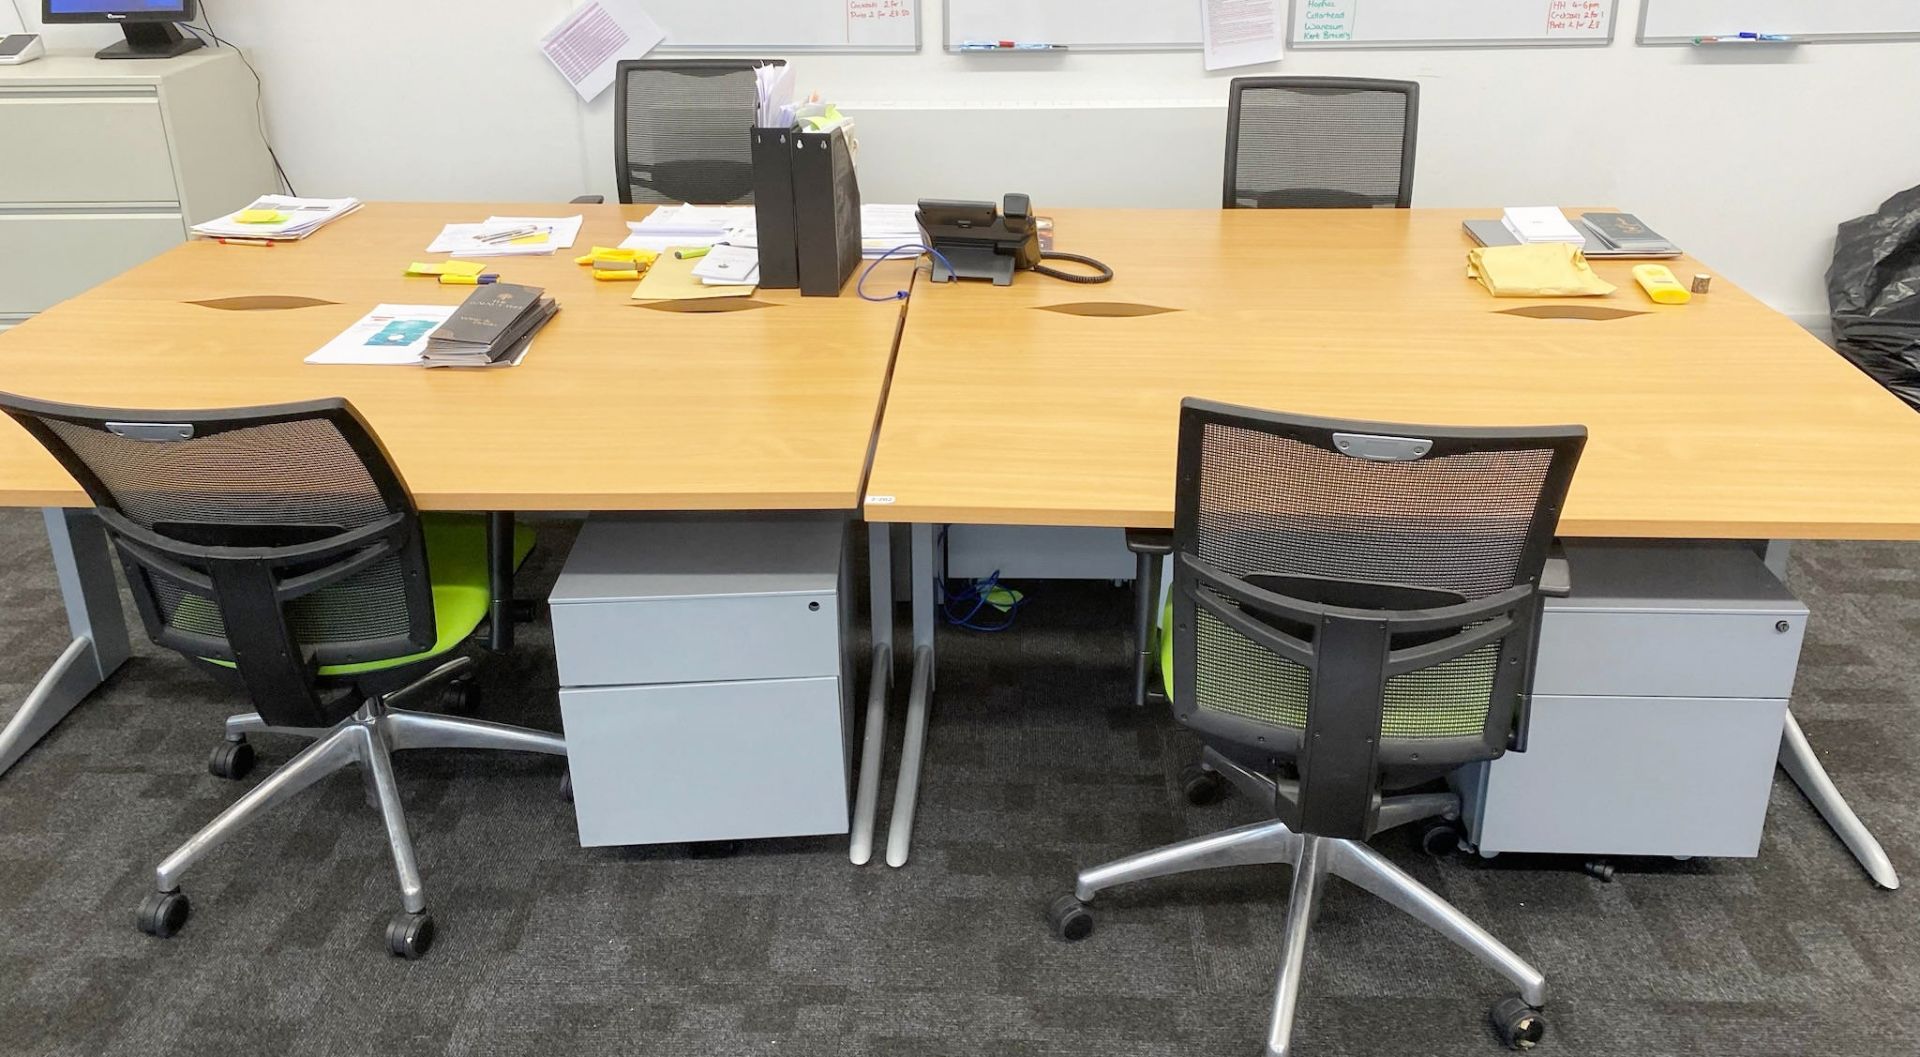 4 x Contemporary Beech Office Desks With Grey Pedestals and Green/Black Swivel Chairs